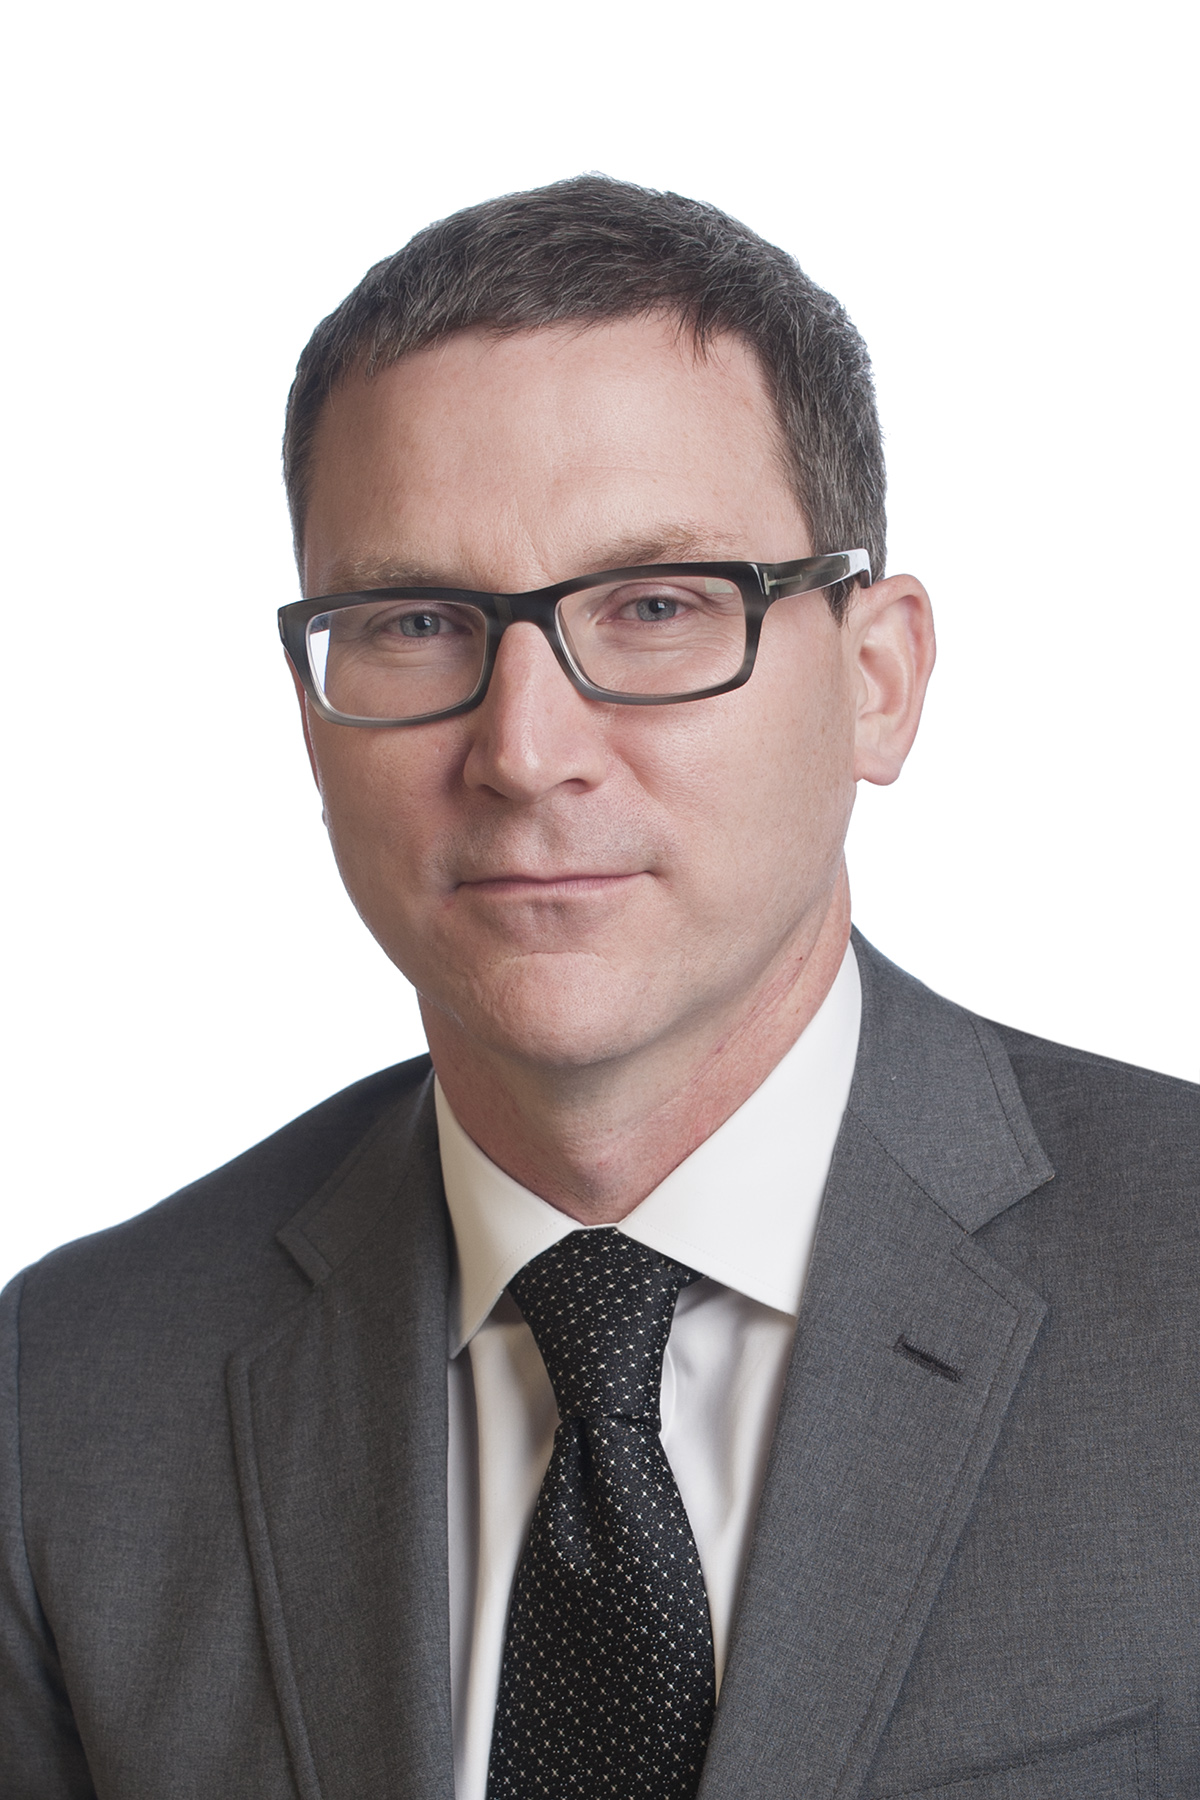 Man in suit and tie wearing glasses. Headshot of Dr. Matt Mulloy.